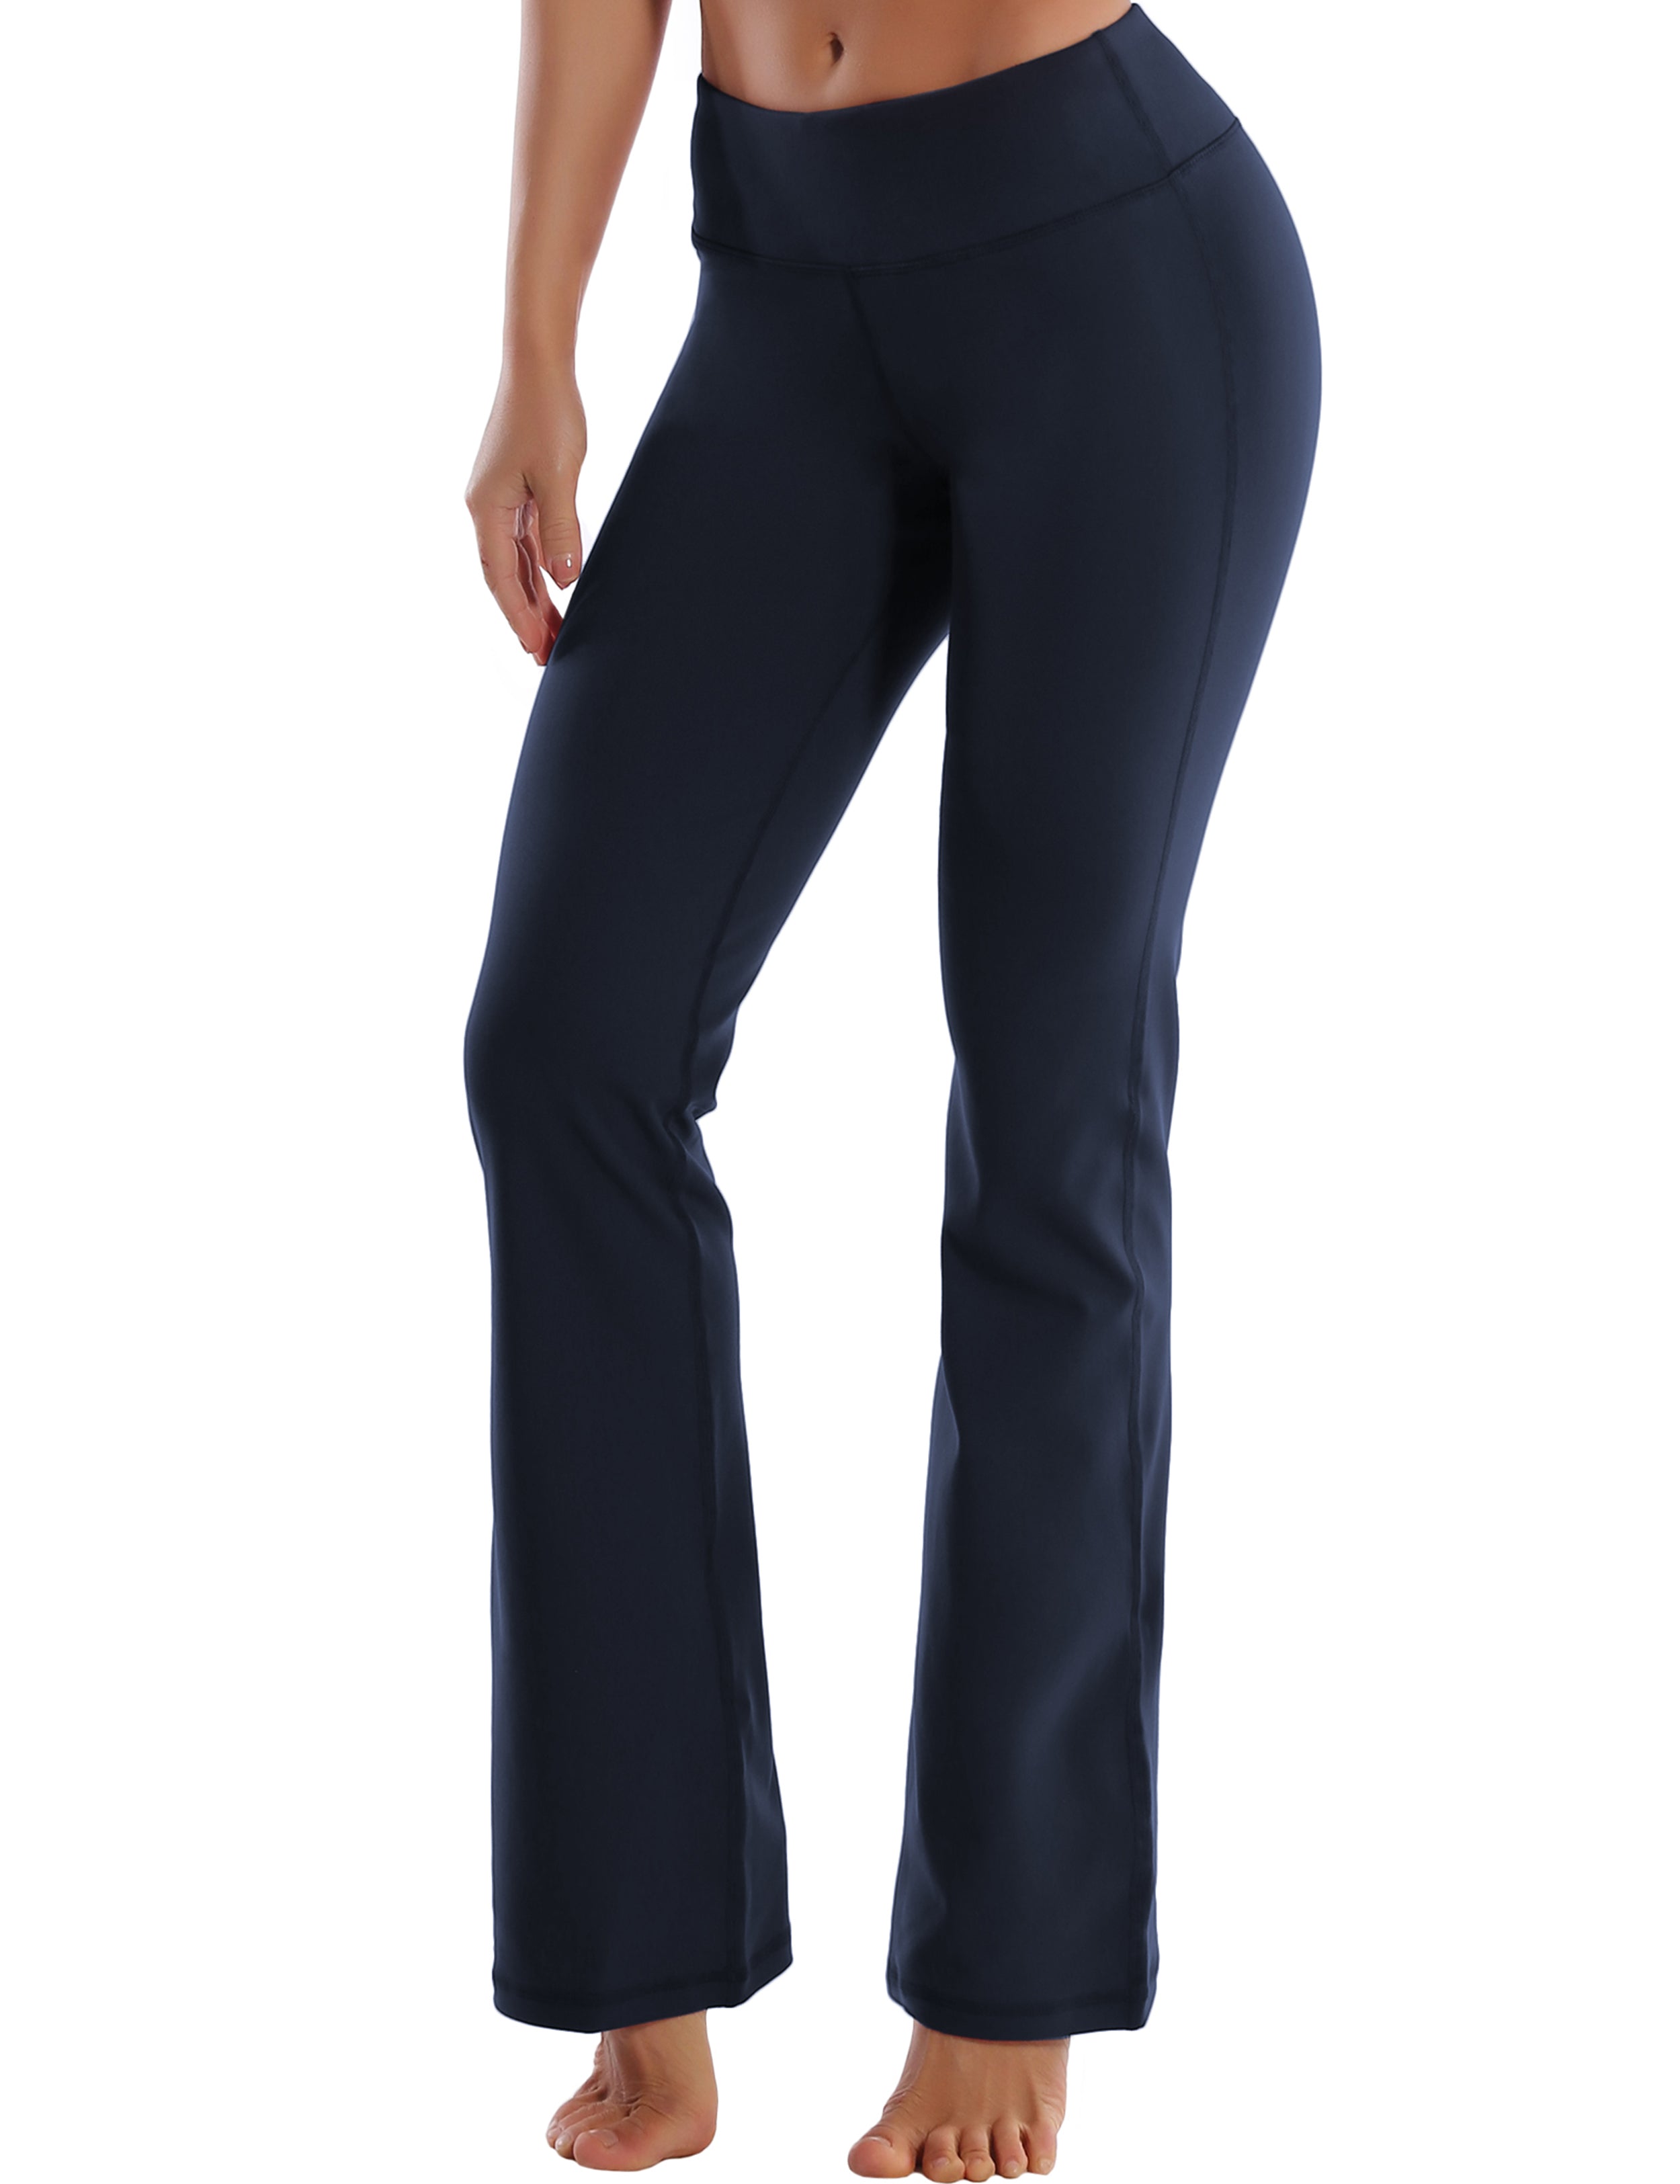 Cotton Nylon Bootcut Leggings darknavy 87%Nylon/13%Spandex (Super soft, cotton feel , 280gsm) Fabric doesn't attract lint easily 4-way stretch No see-through Moisture-wicking Inner pocket Four lengths